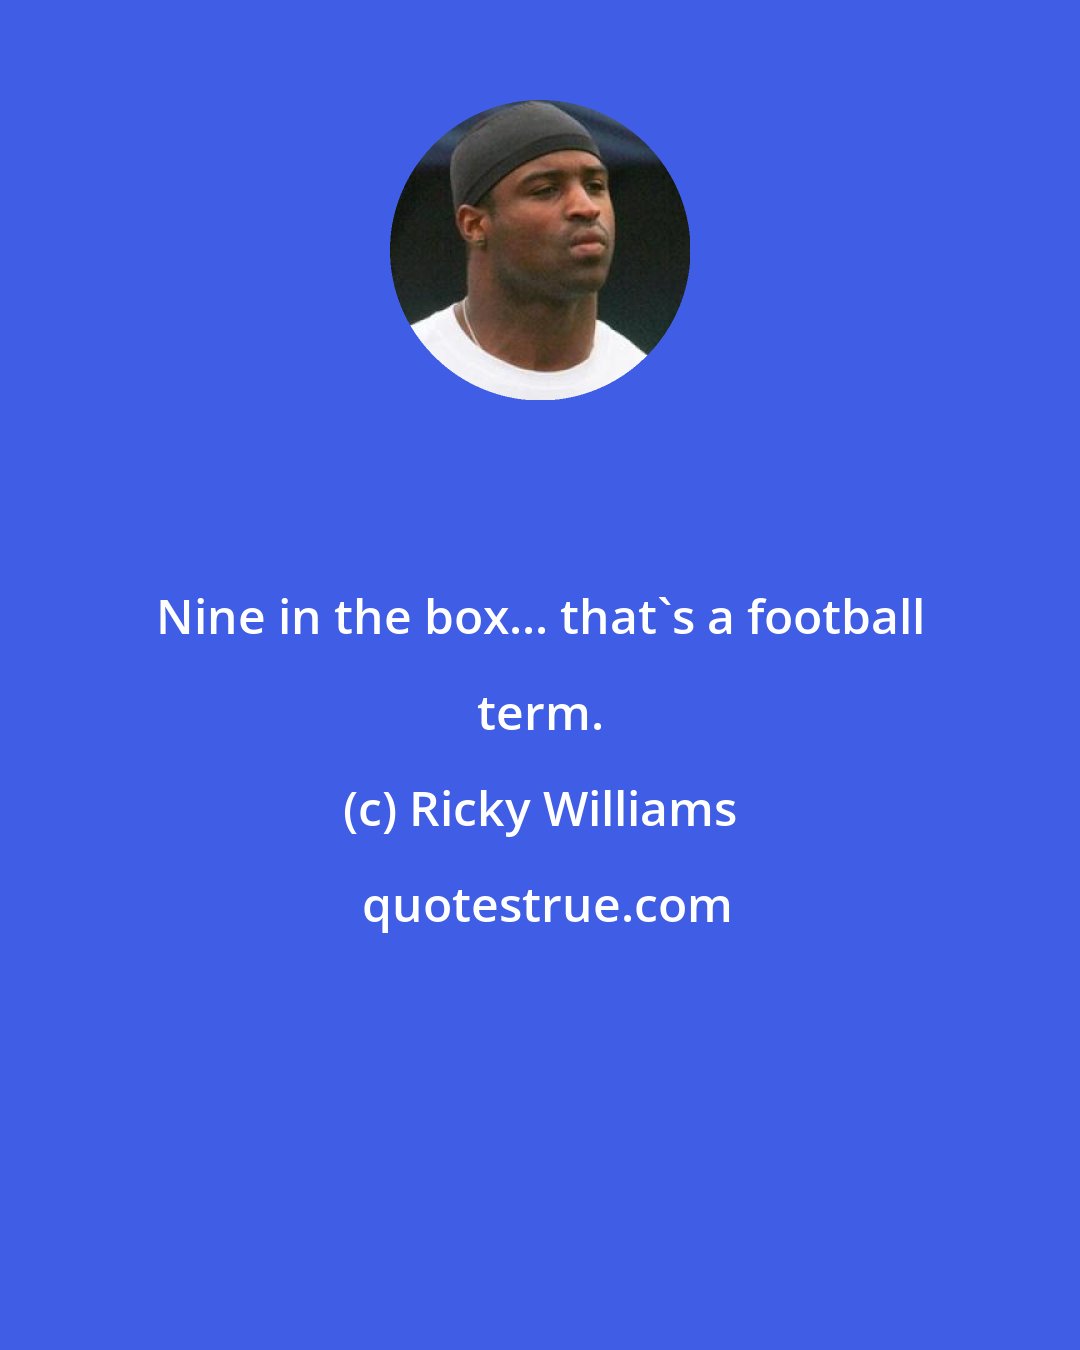 Ricky Williams: Nine in the box... that's a football term.